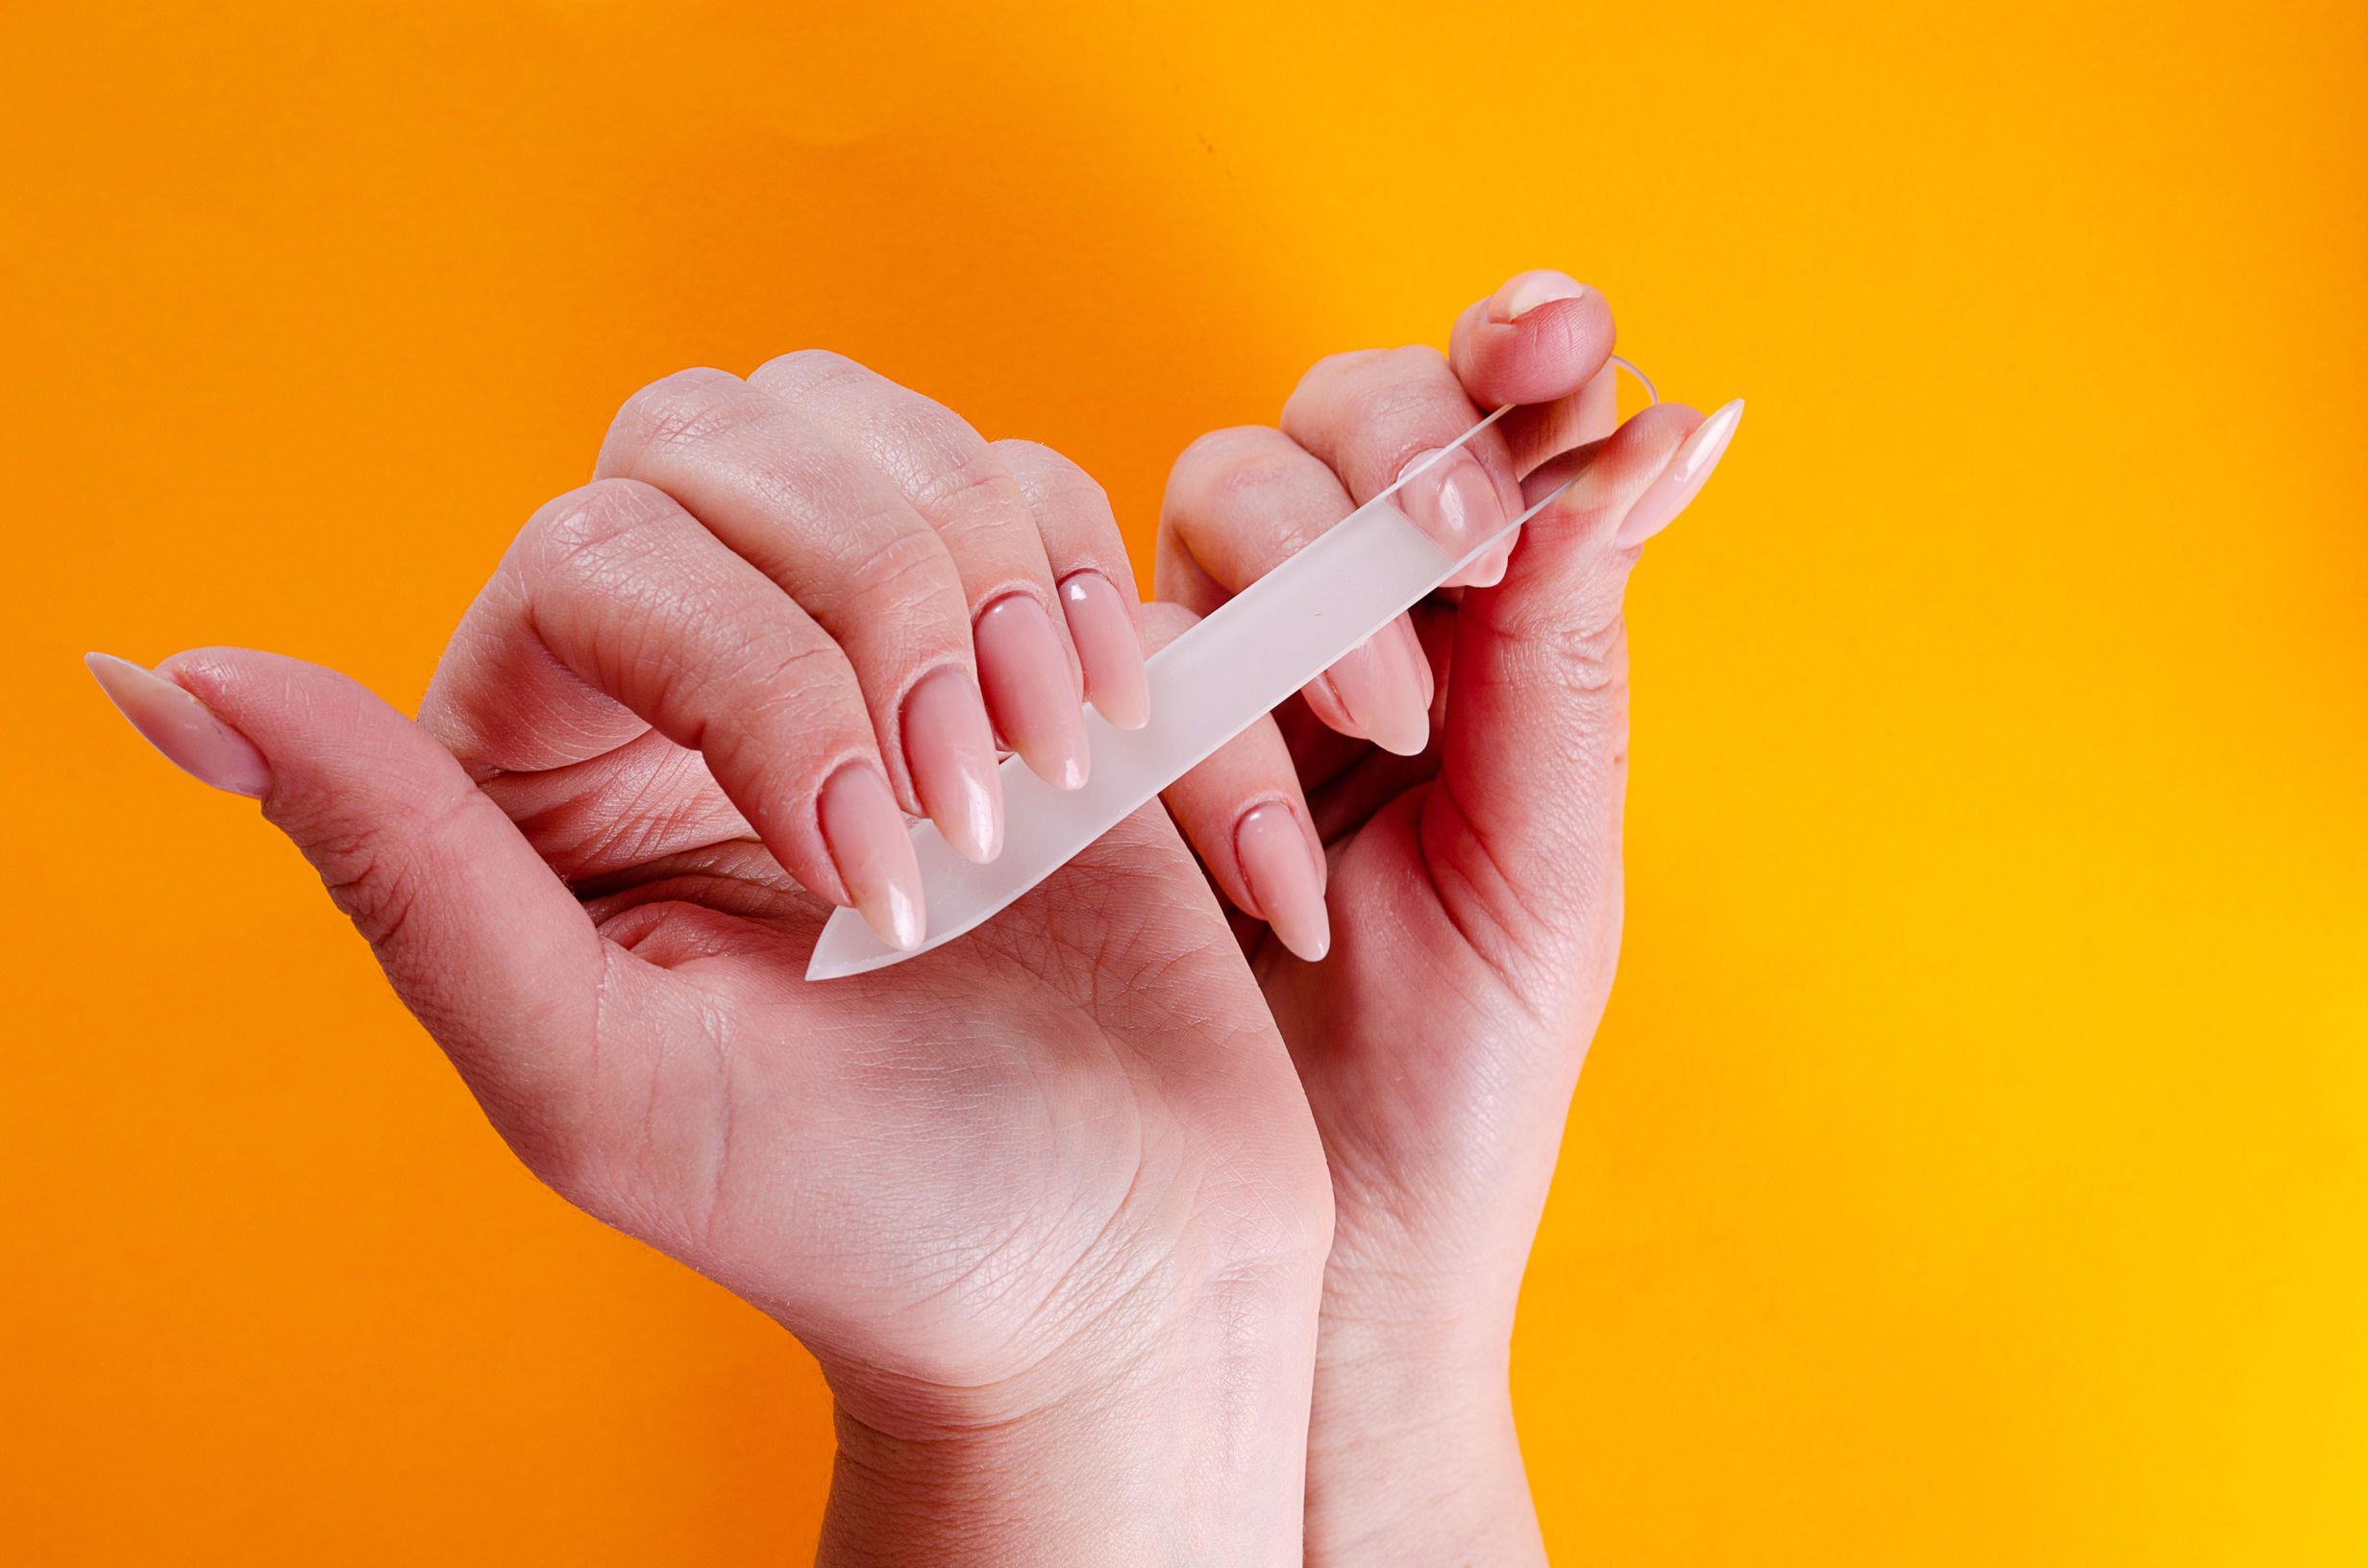 Glass nail files: A healthier option for your nails (plus, the best buys)